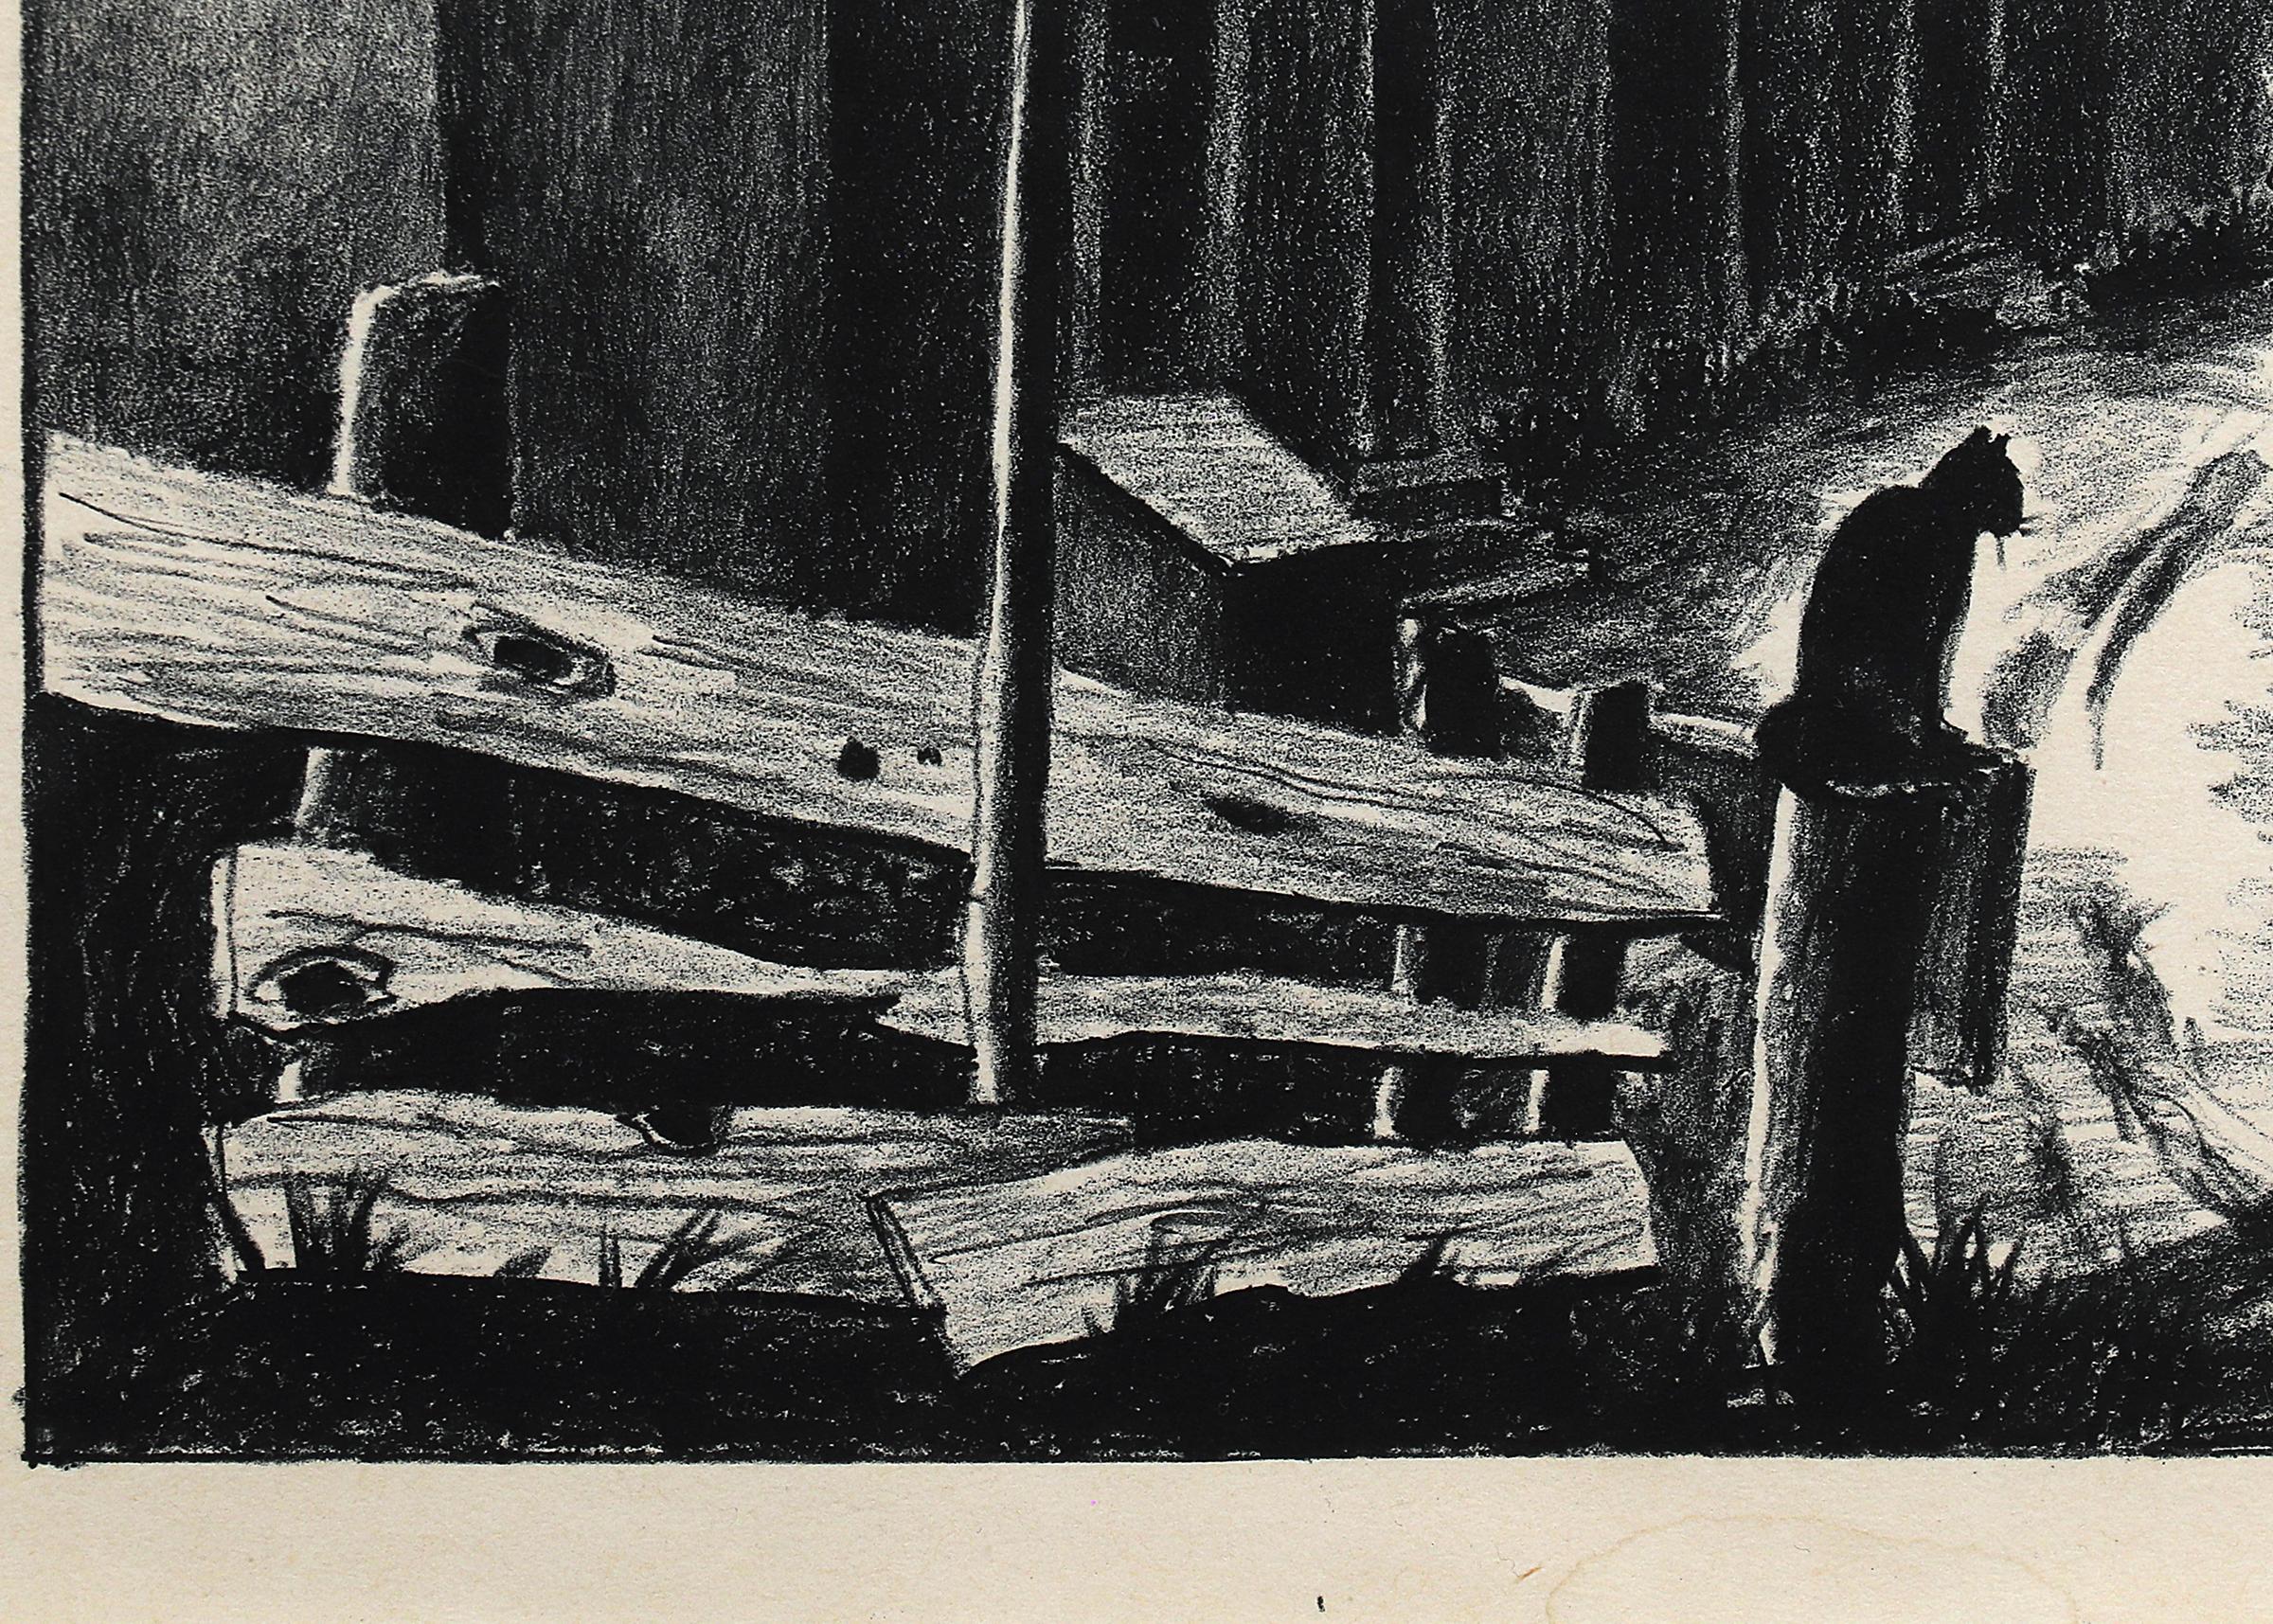 American modern lithograph on paper titled 'Mining Town' signed by artist Robert Beauchamp (1923-1995) featuring a figure walking and a cat sitting on a fence in a mining town. Image is 9 1⁄4 x 12 1⁄4 inches, framed dimensions are 16 1⁄2 x 19 1⁄2